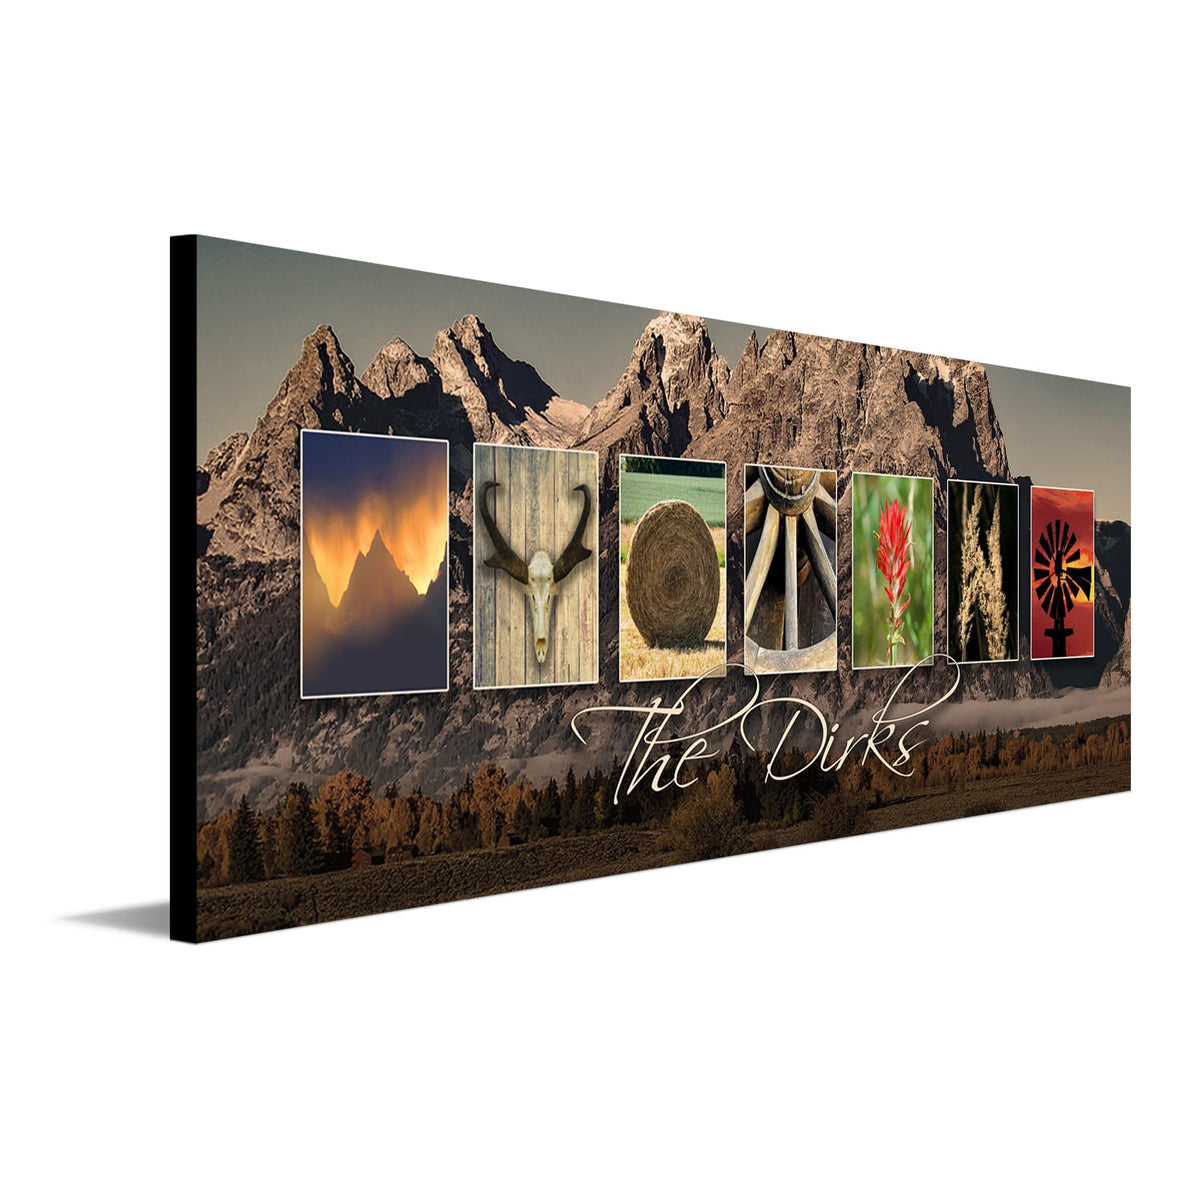 Personalized Wyoming art using images from the state to spell the word Wyoming - Personal-Prints